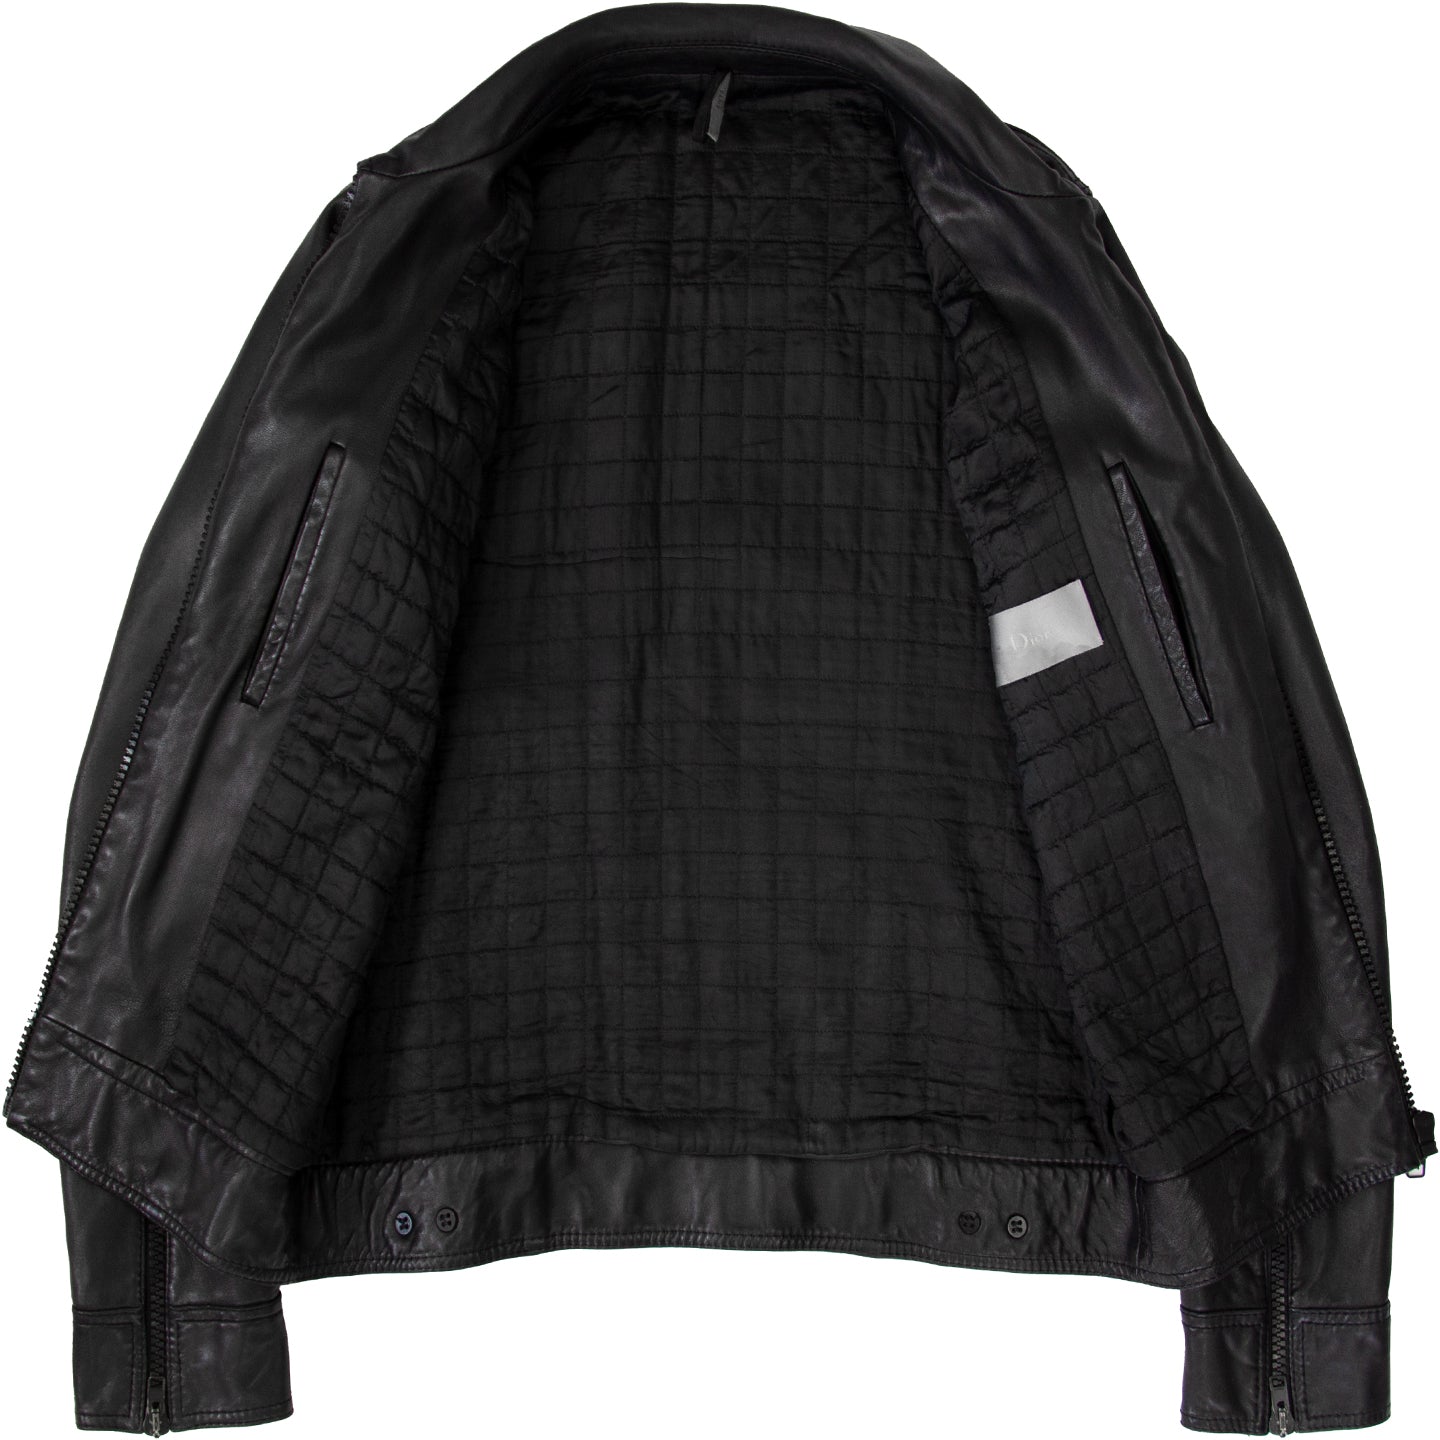 DIOR HOMME AW07 NAVIGATE LEATHER JACKET